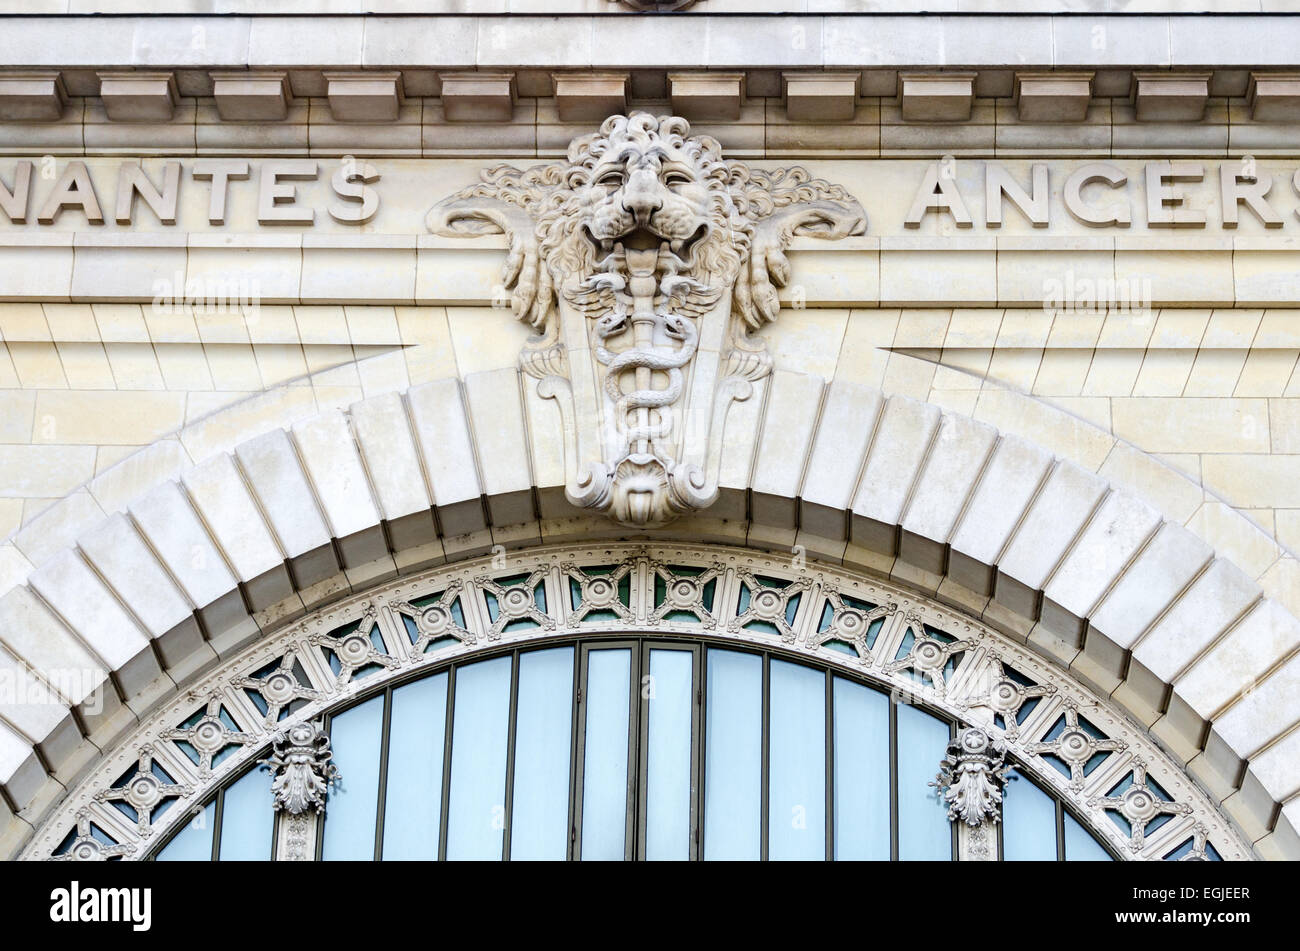 The names of French cities are carved on the exterior of the Musee d'Orsay, remnants of its origin as a railway station. Stock Photo